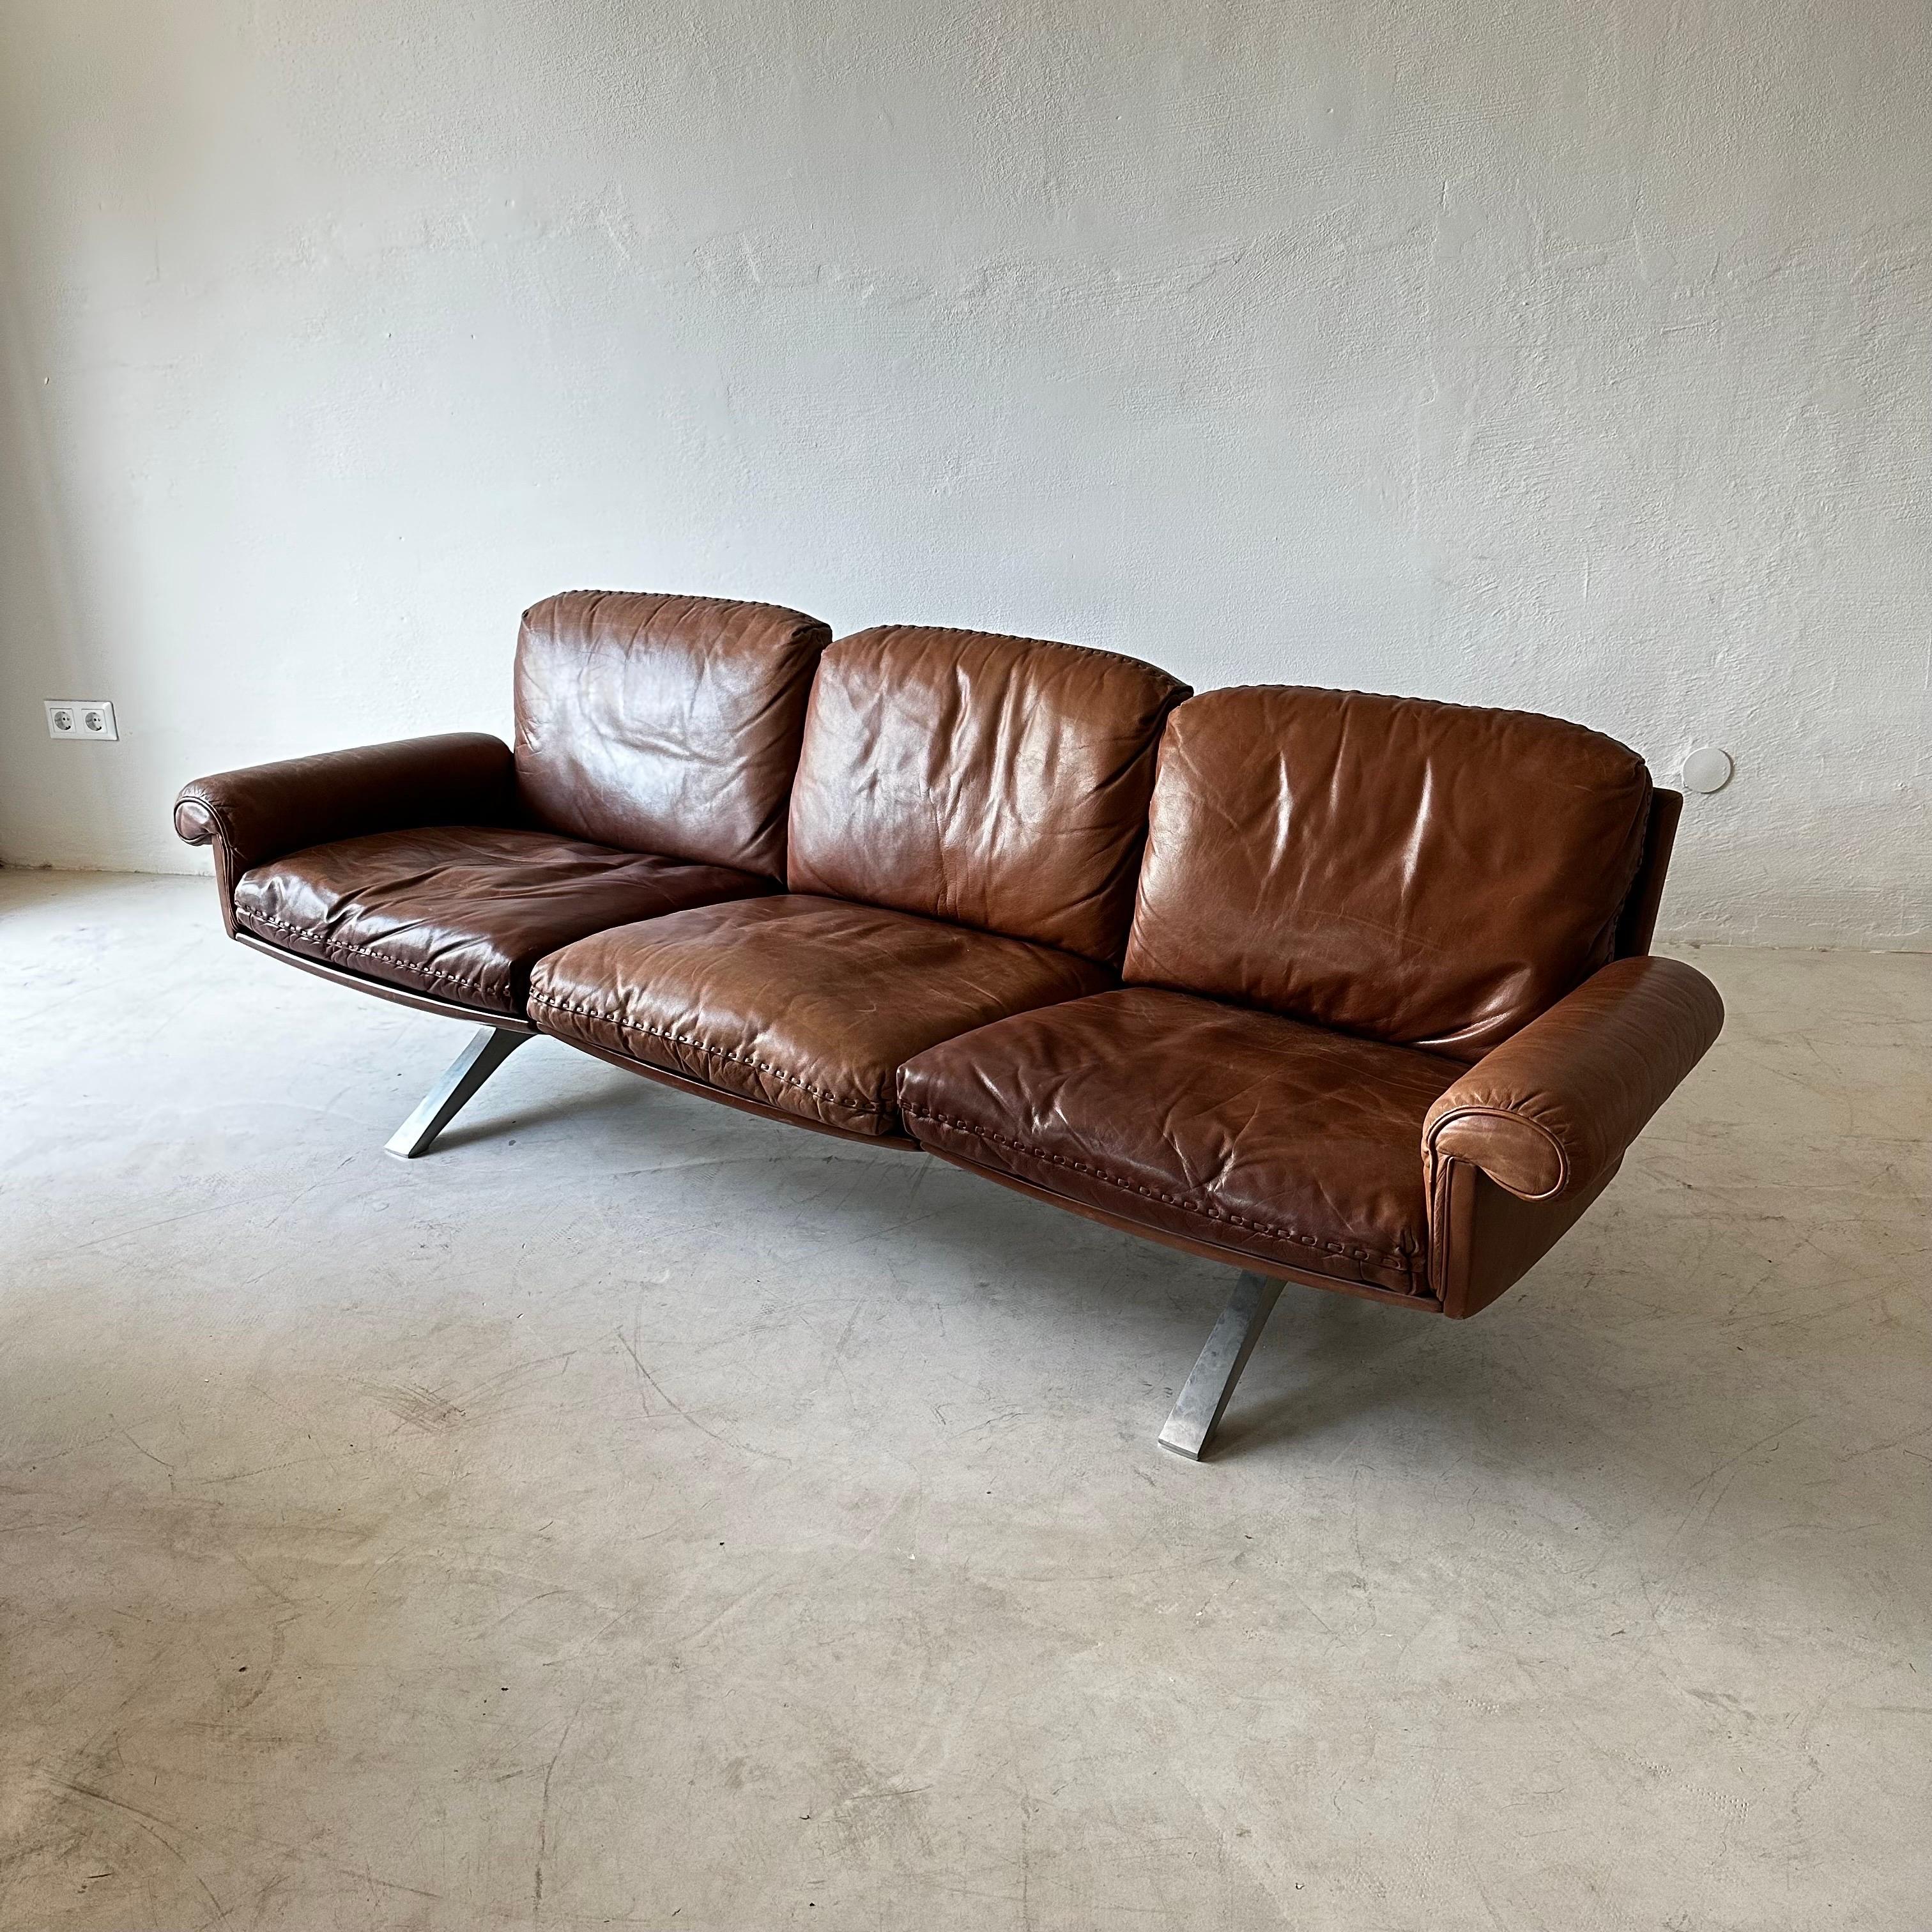 Rare pair of vintage 1970s De Sede DS-31 designer sofa in dark cognac brown leather. Beautifully patinated in soft luxury leather. Price is for one piece. Two pieces are available.